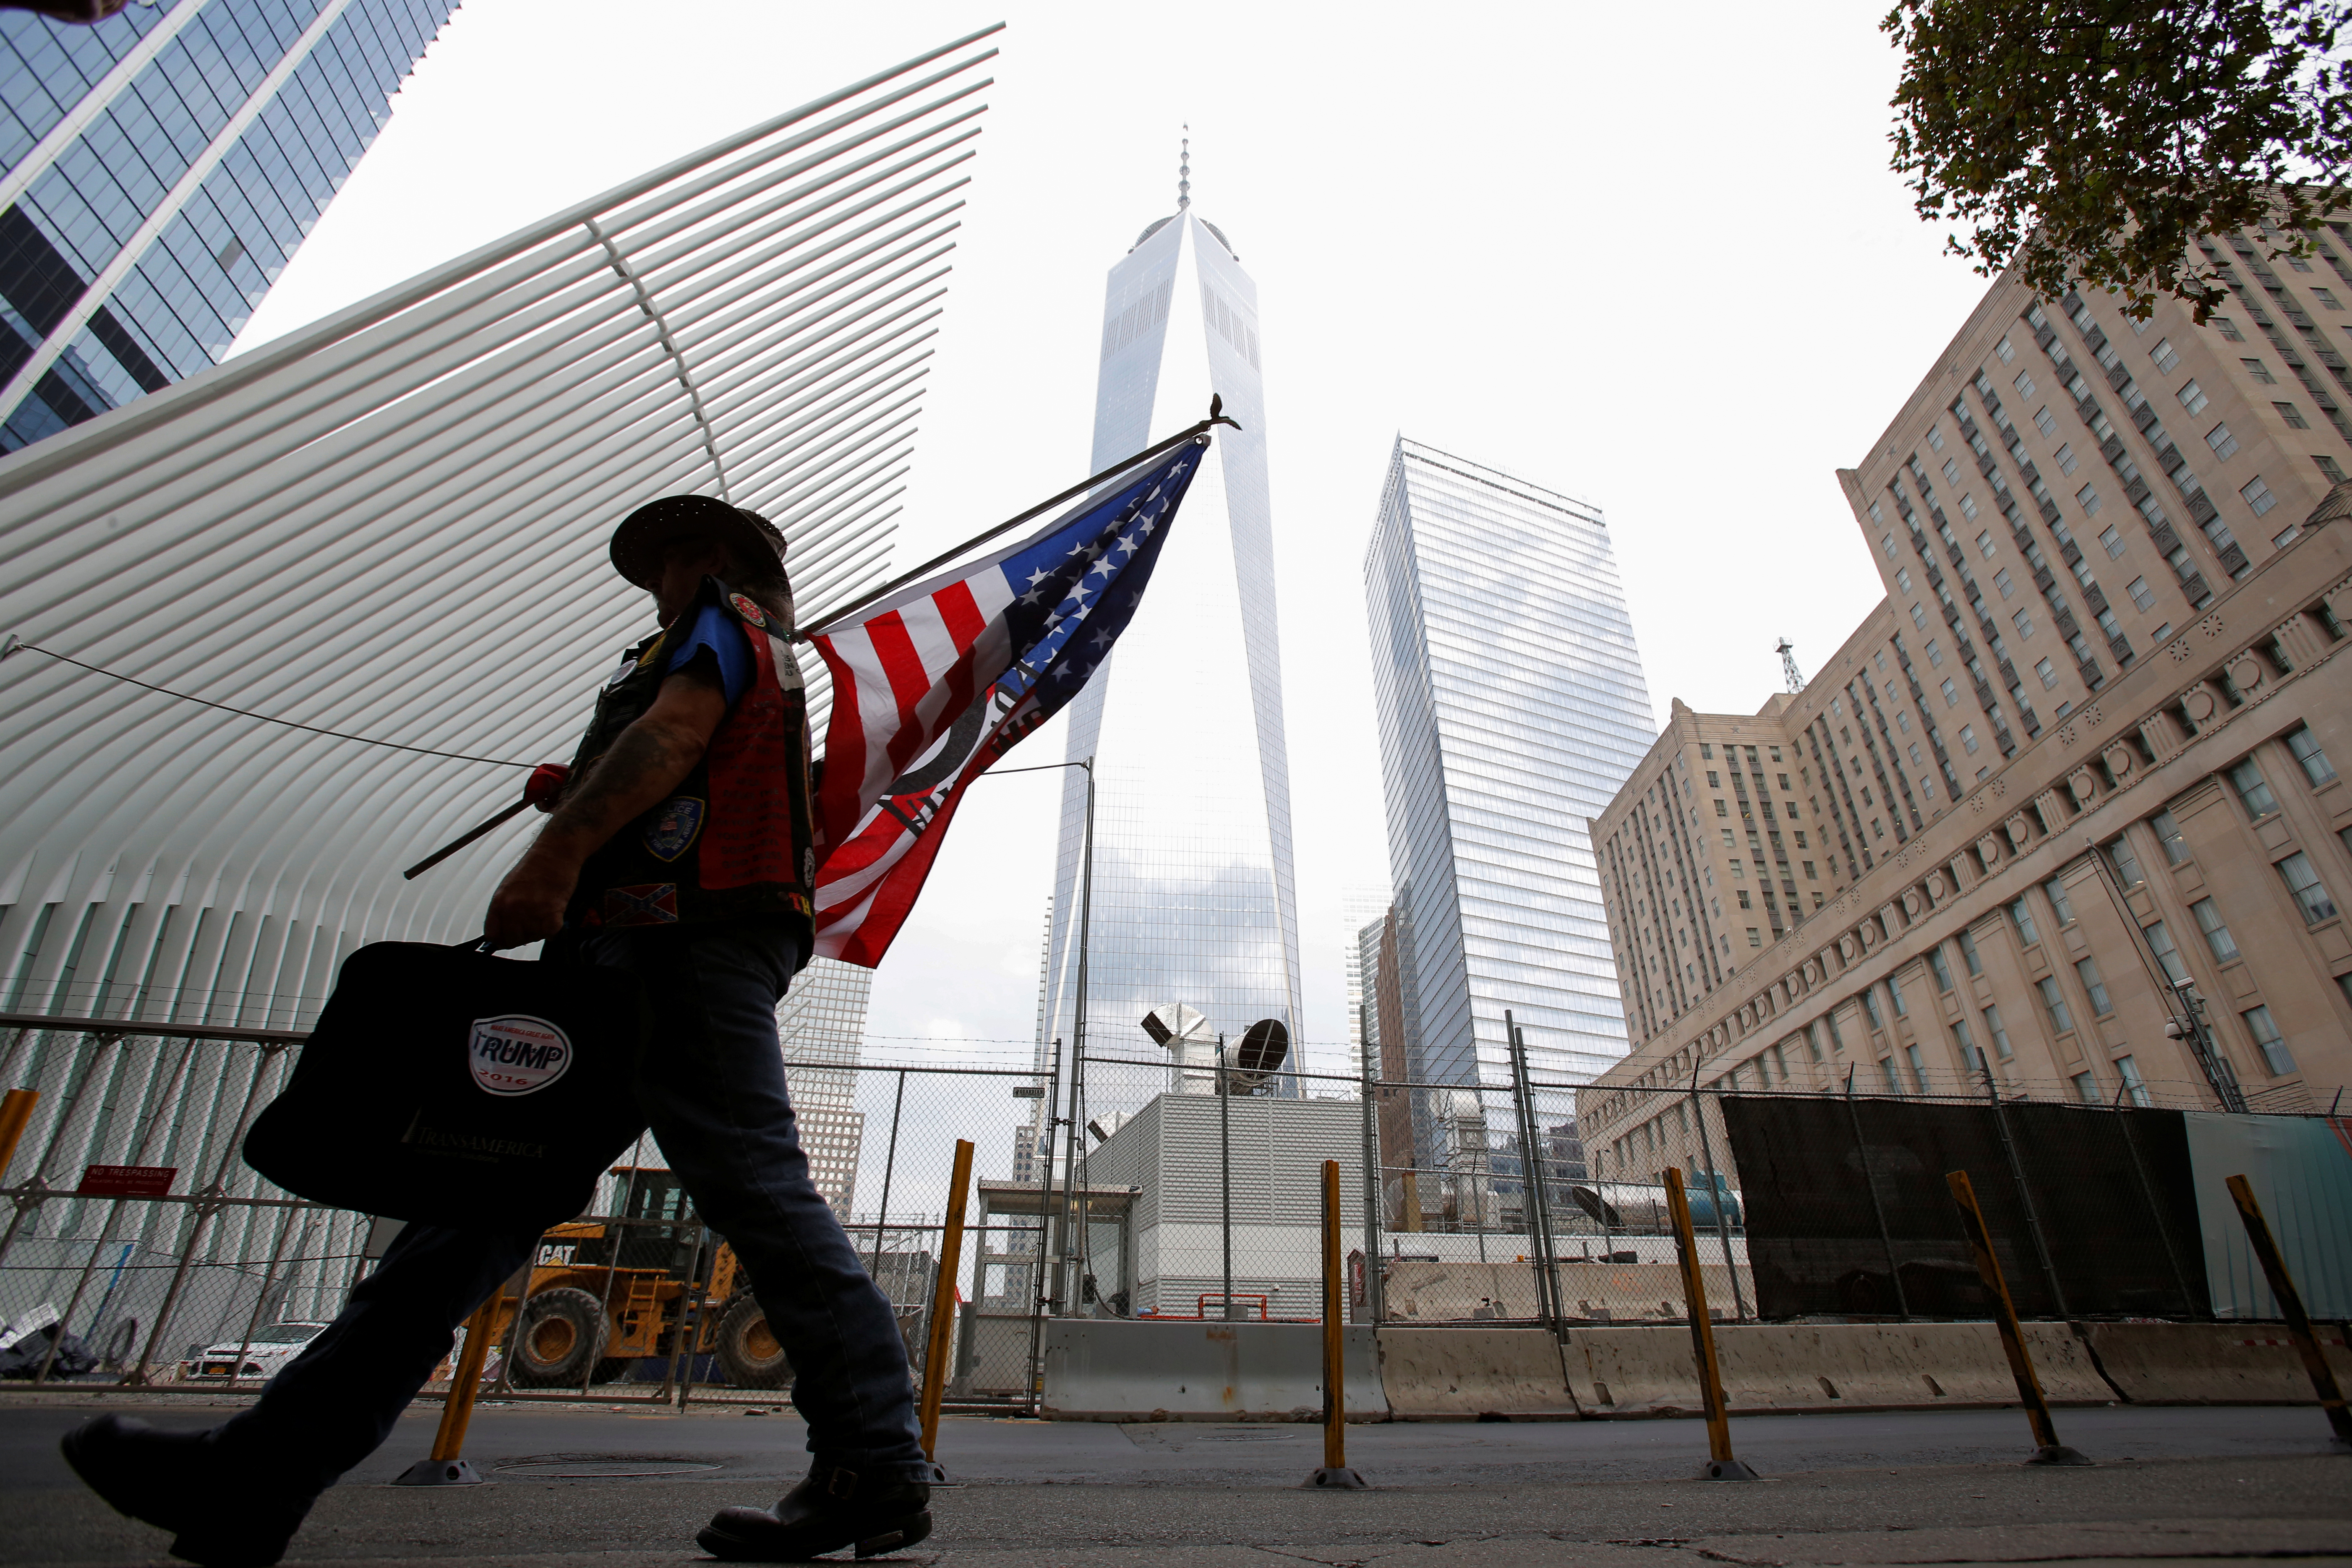 America remembers the 9/11 attacks: 20 years later